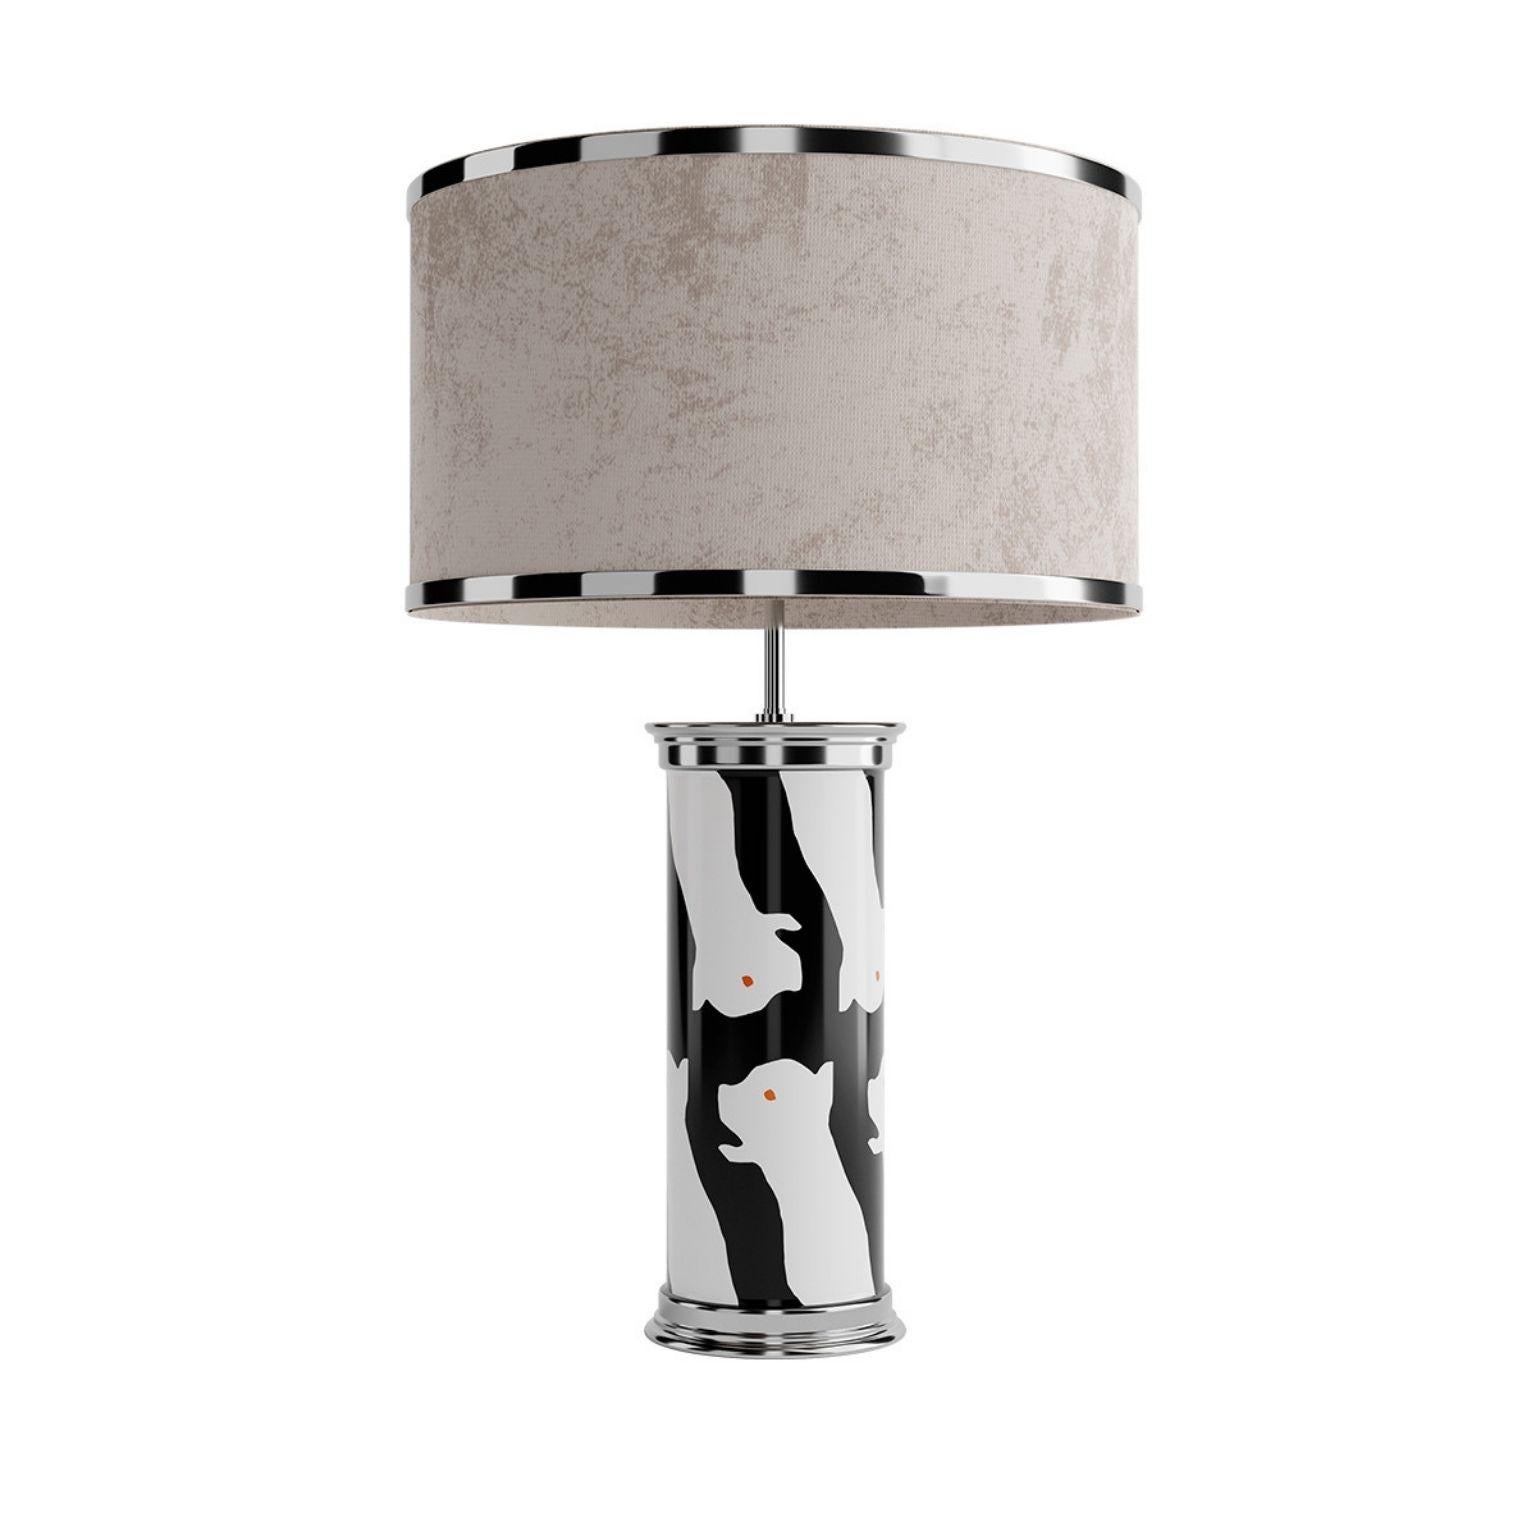 Hand-Painted Eclipse Table Lamp, an Handmade Grey, Black and White Decor Lamp

Eclipse table lamp is the game-changing of your home decor; an extraordinary personification of beauty and drama in a decor lamp. The hand-painted base is inspired by a